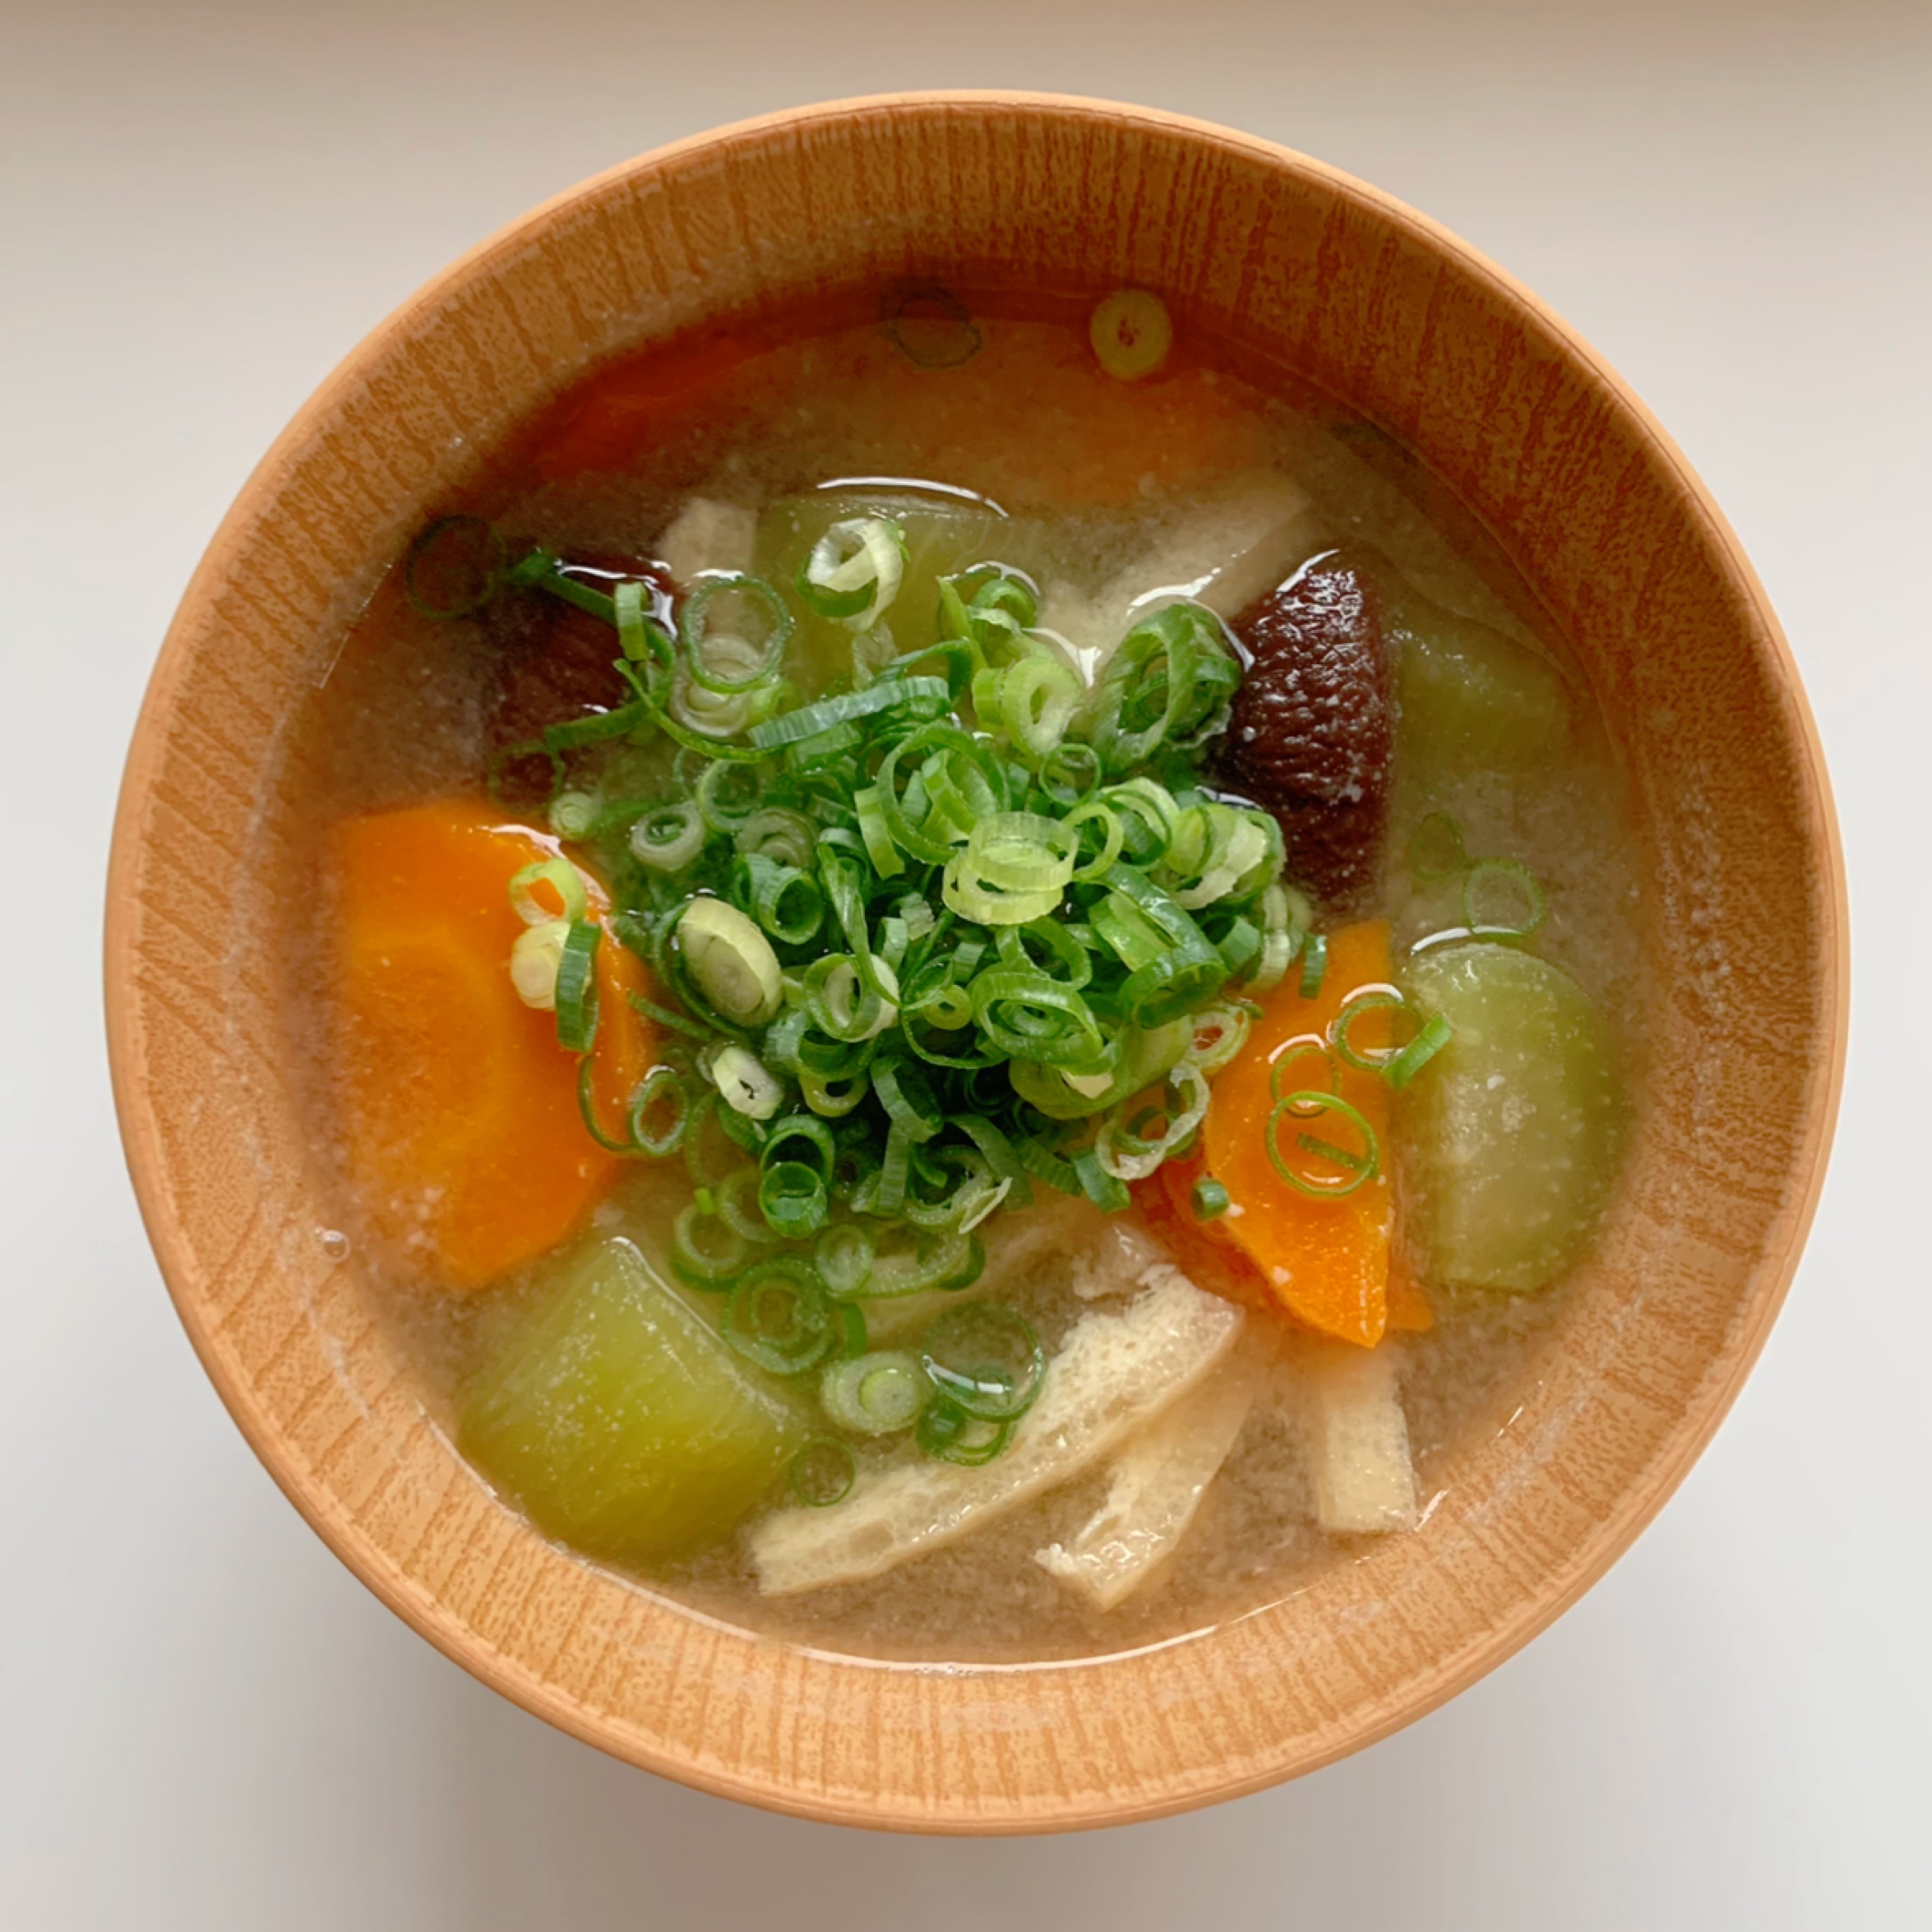 Japanese miso soup with plenty of vegetables